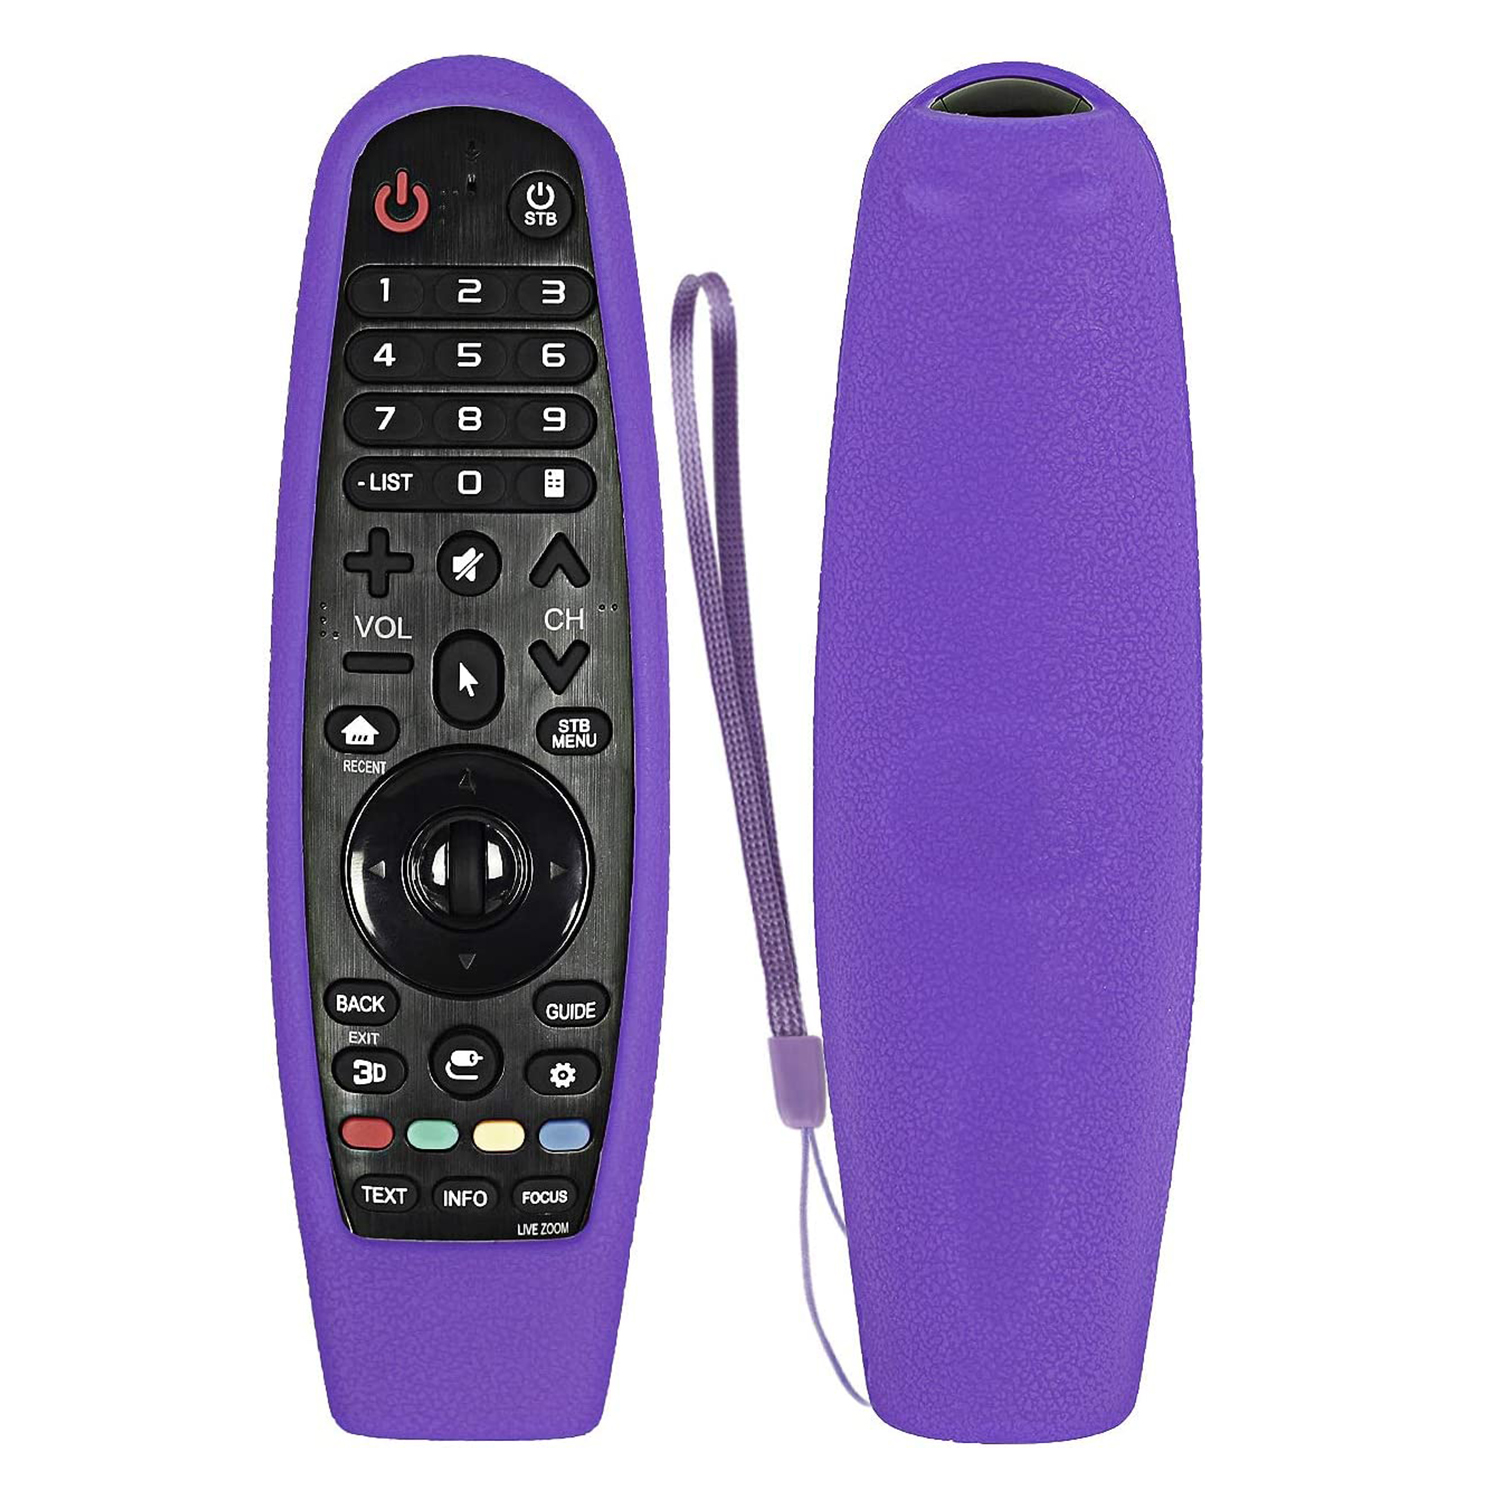 Silicone Case For LG Smart TV Magic AN-MR19BA/MR18BA Remote Control  Protective Cover For AN-MR600/MR650A/MR20GA AKB75855501 - AliExpress